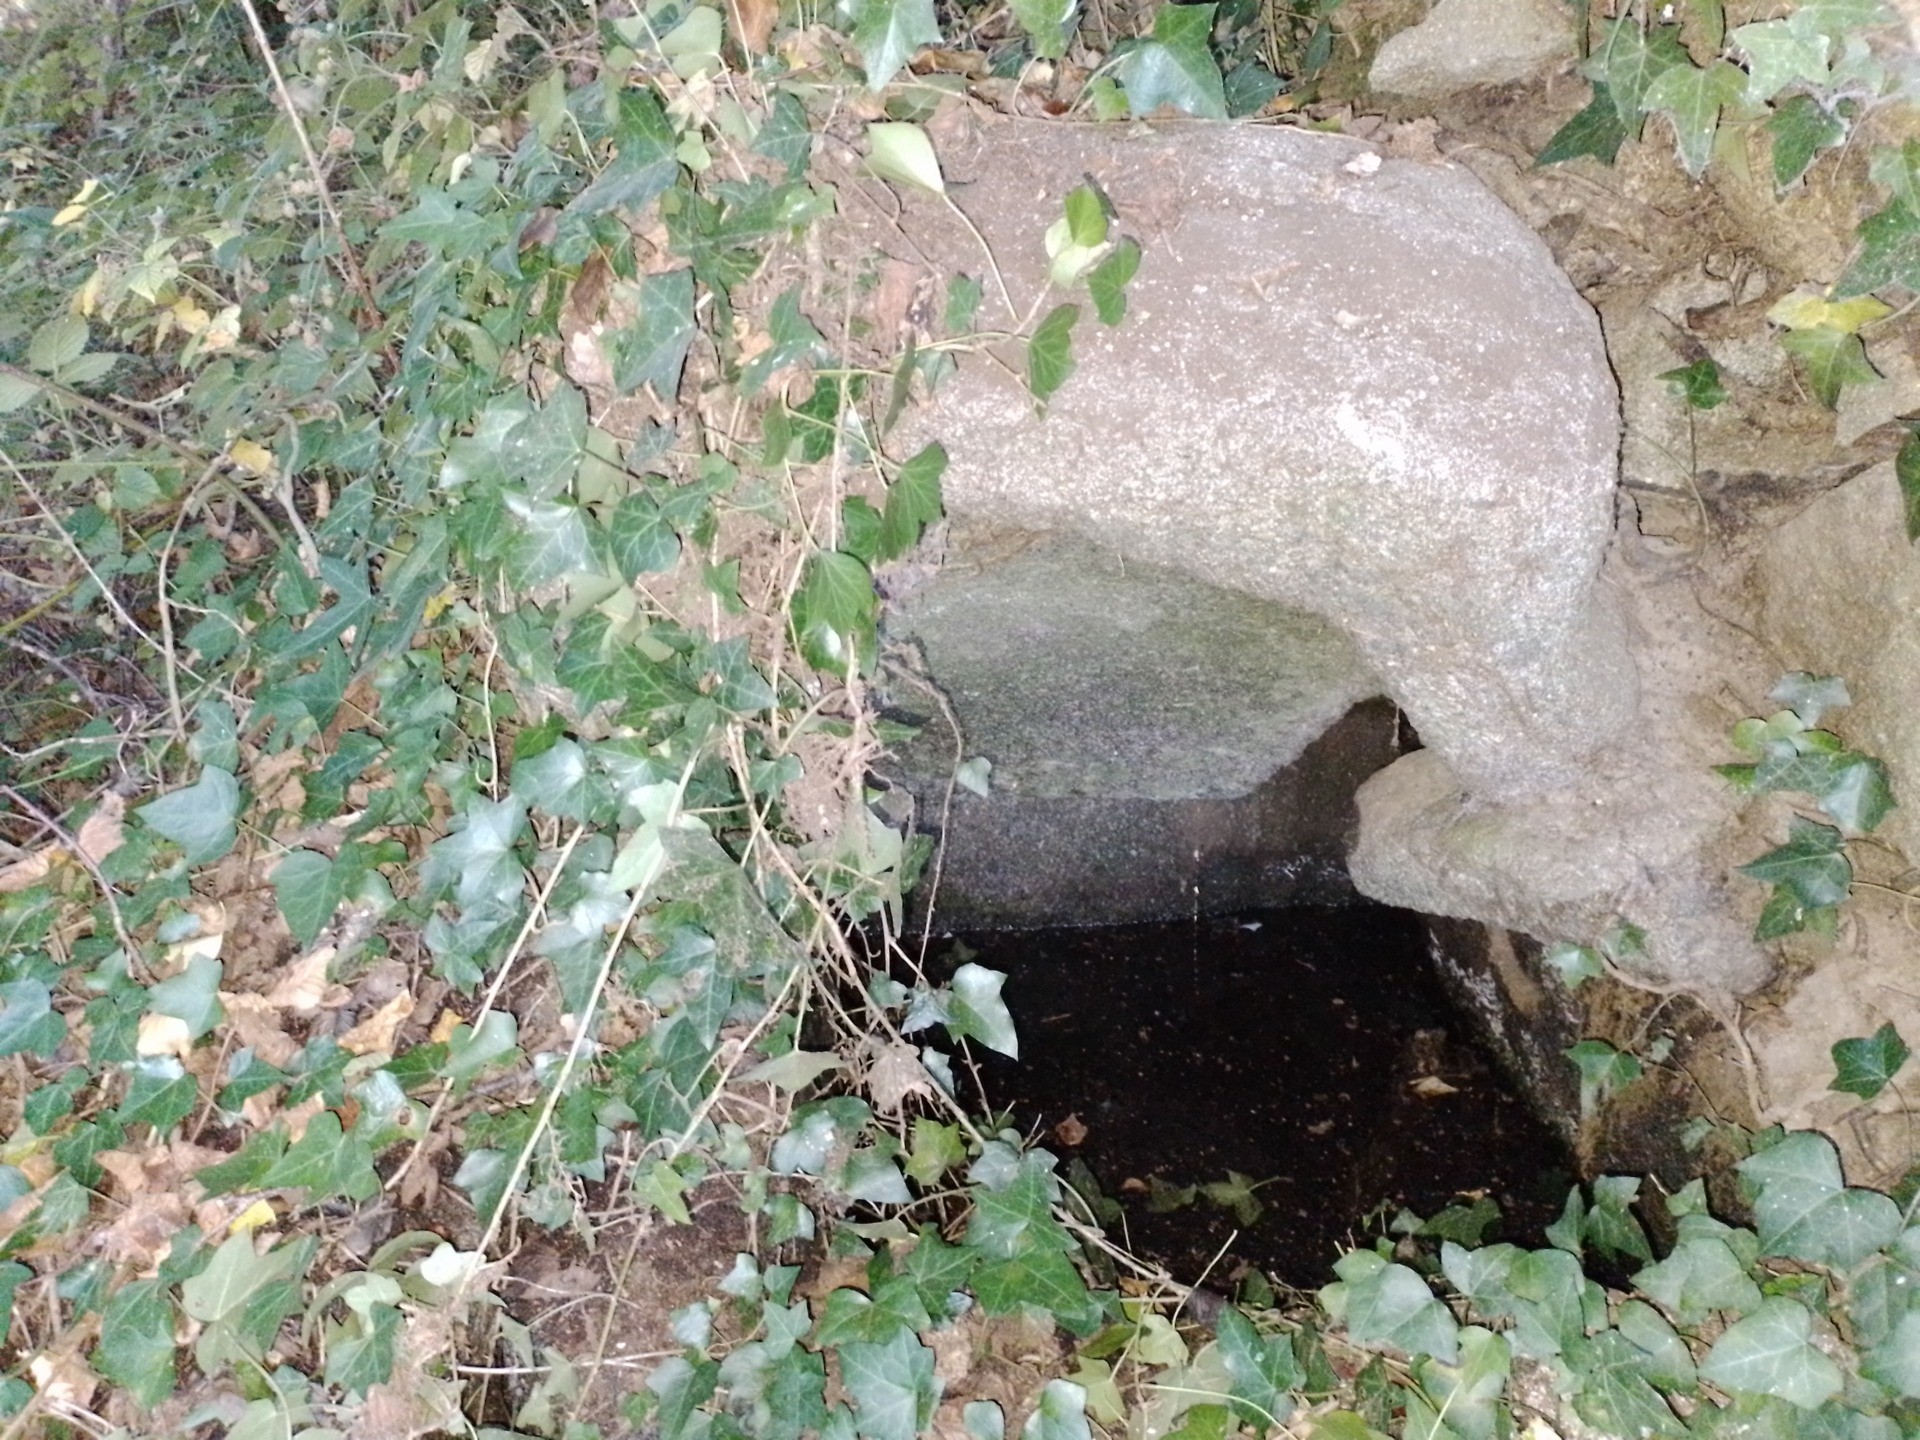 We’ve found an ancient well